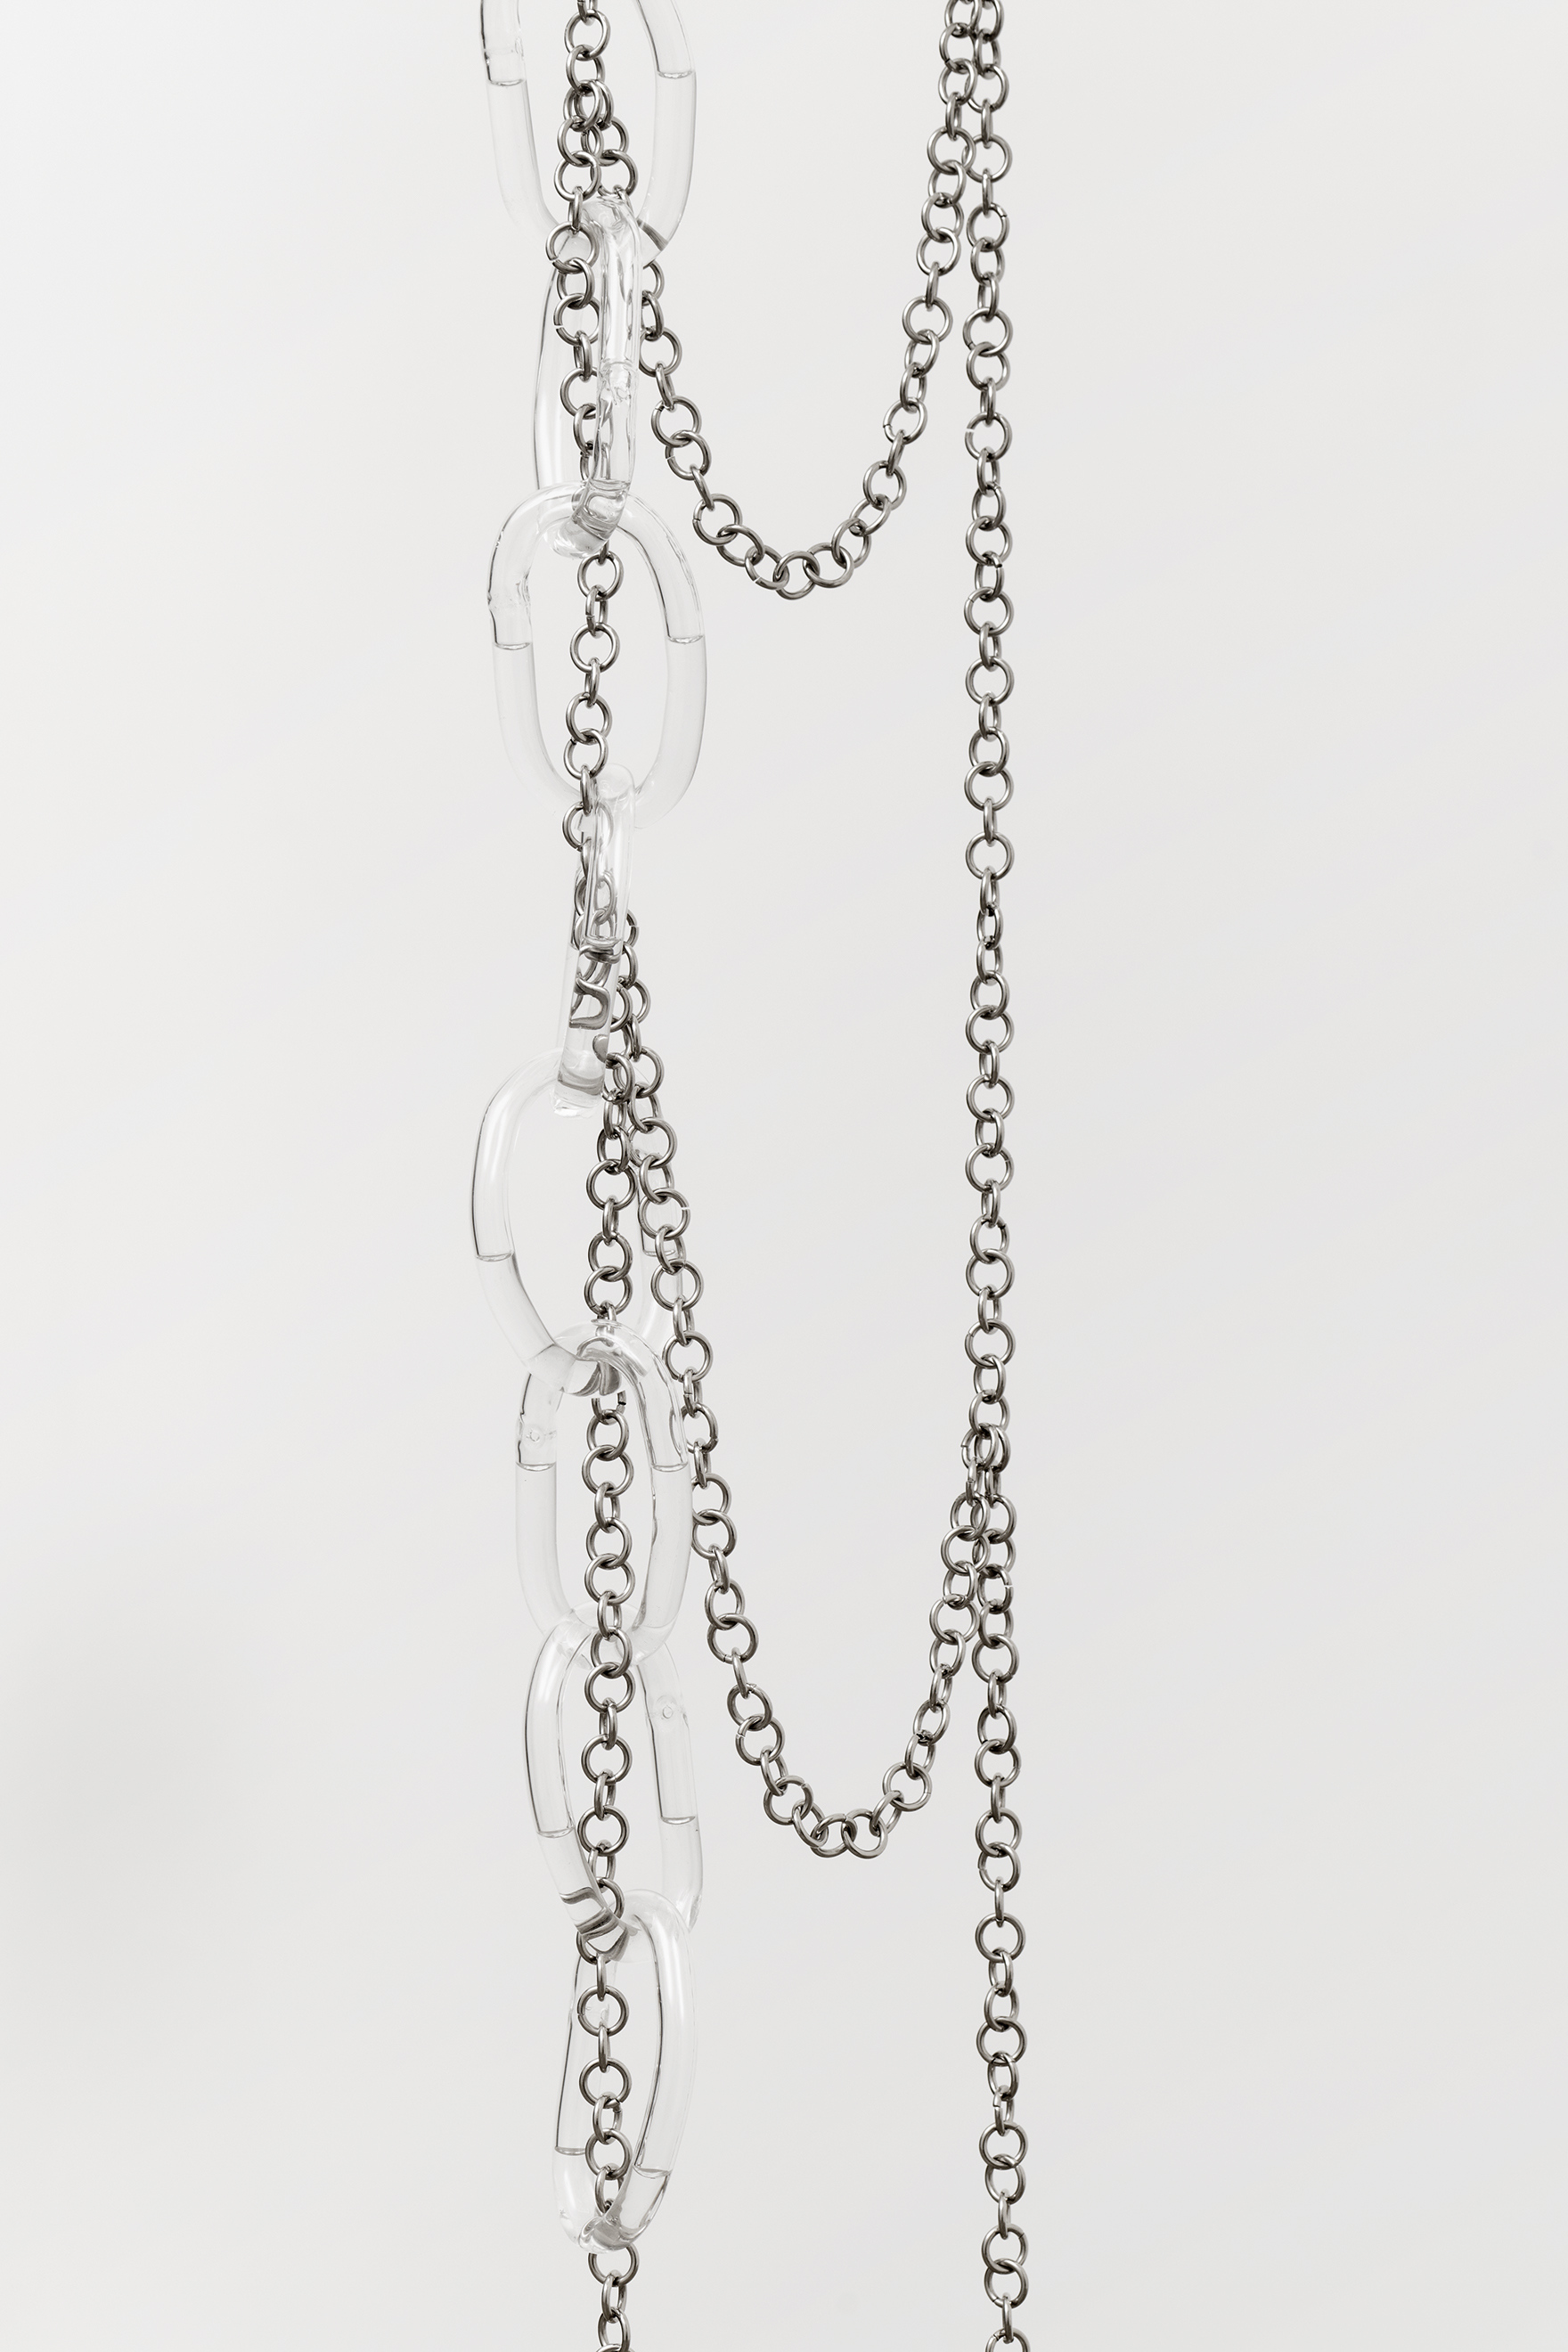 Andreia Santana, Sweaty Chains, 2022, water, glass and chain mail, 260 x 20 x 8 cm, unique